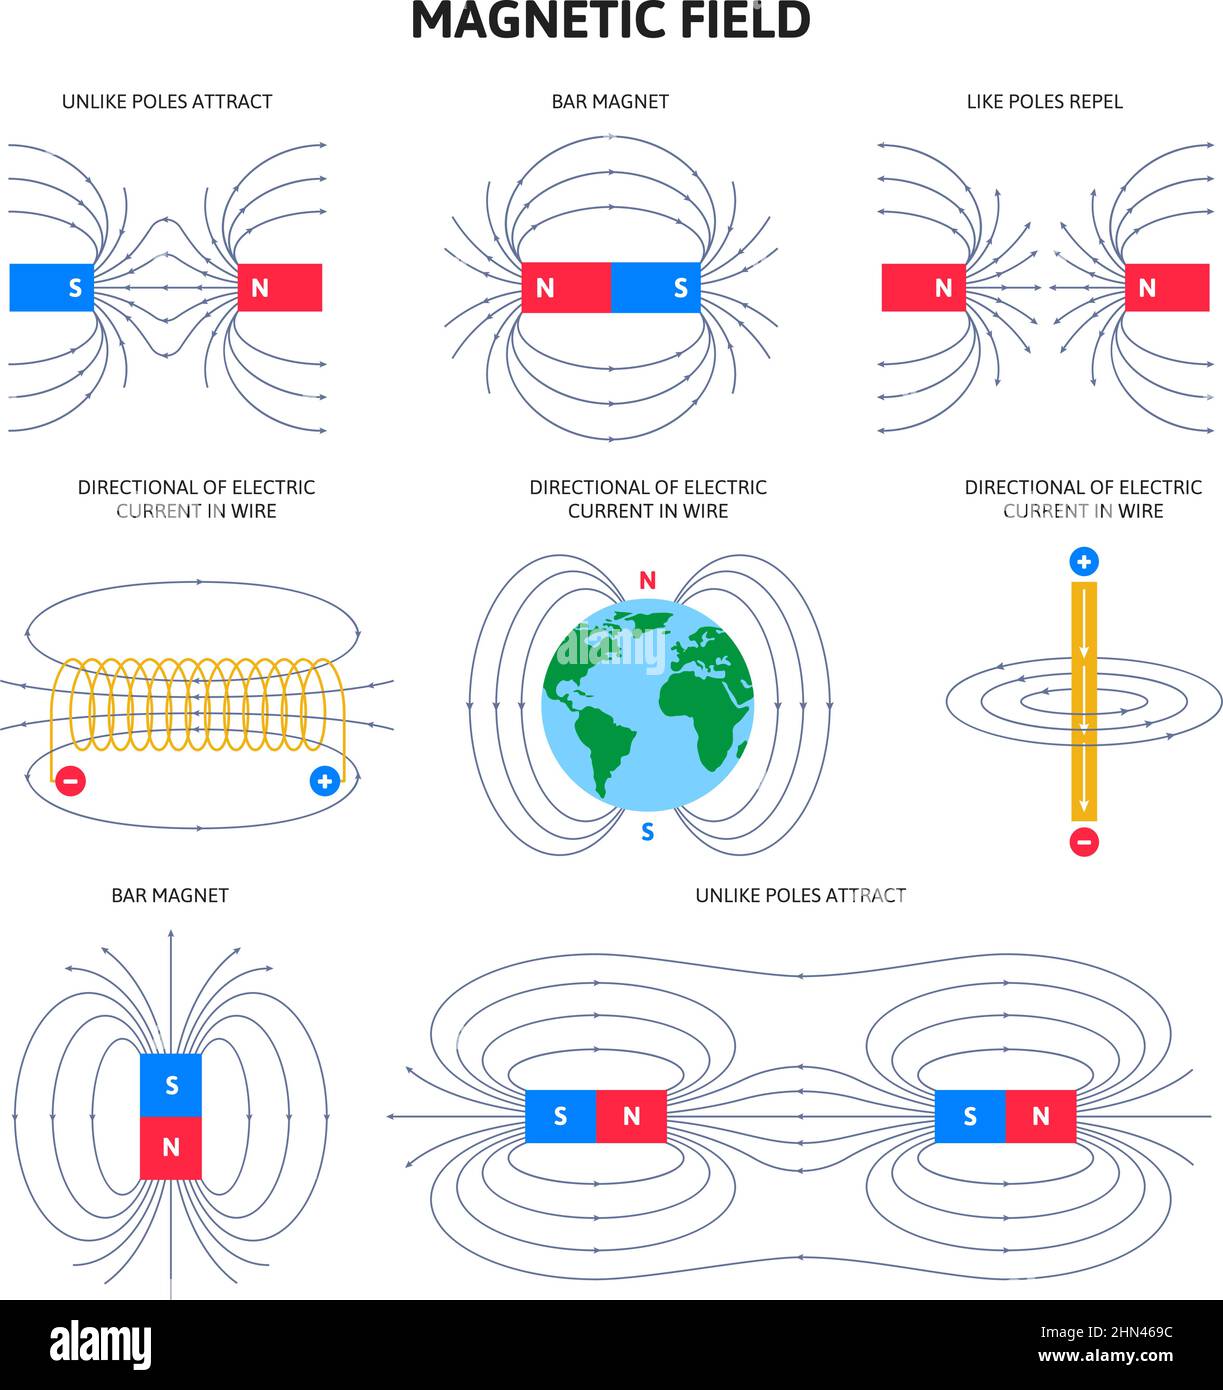 Electromagnetic field and magnetic force, physics magnetism schemes. Scientific magnetic field diagram vector illustration set. Polar magnets and Stock Vector